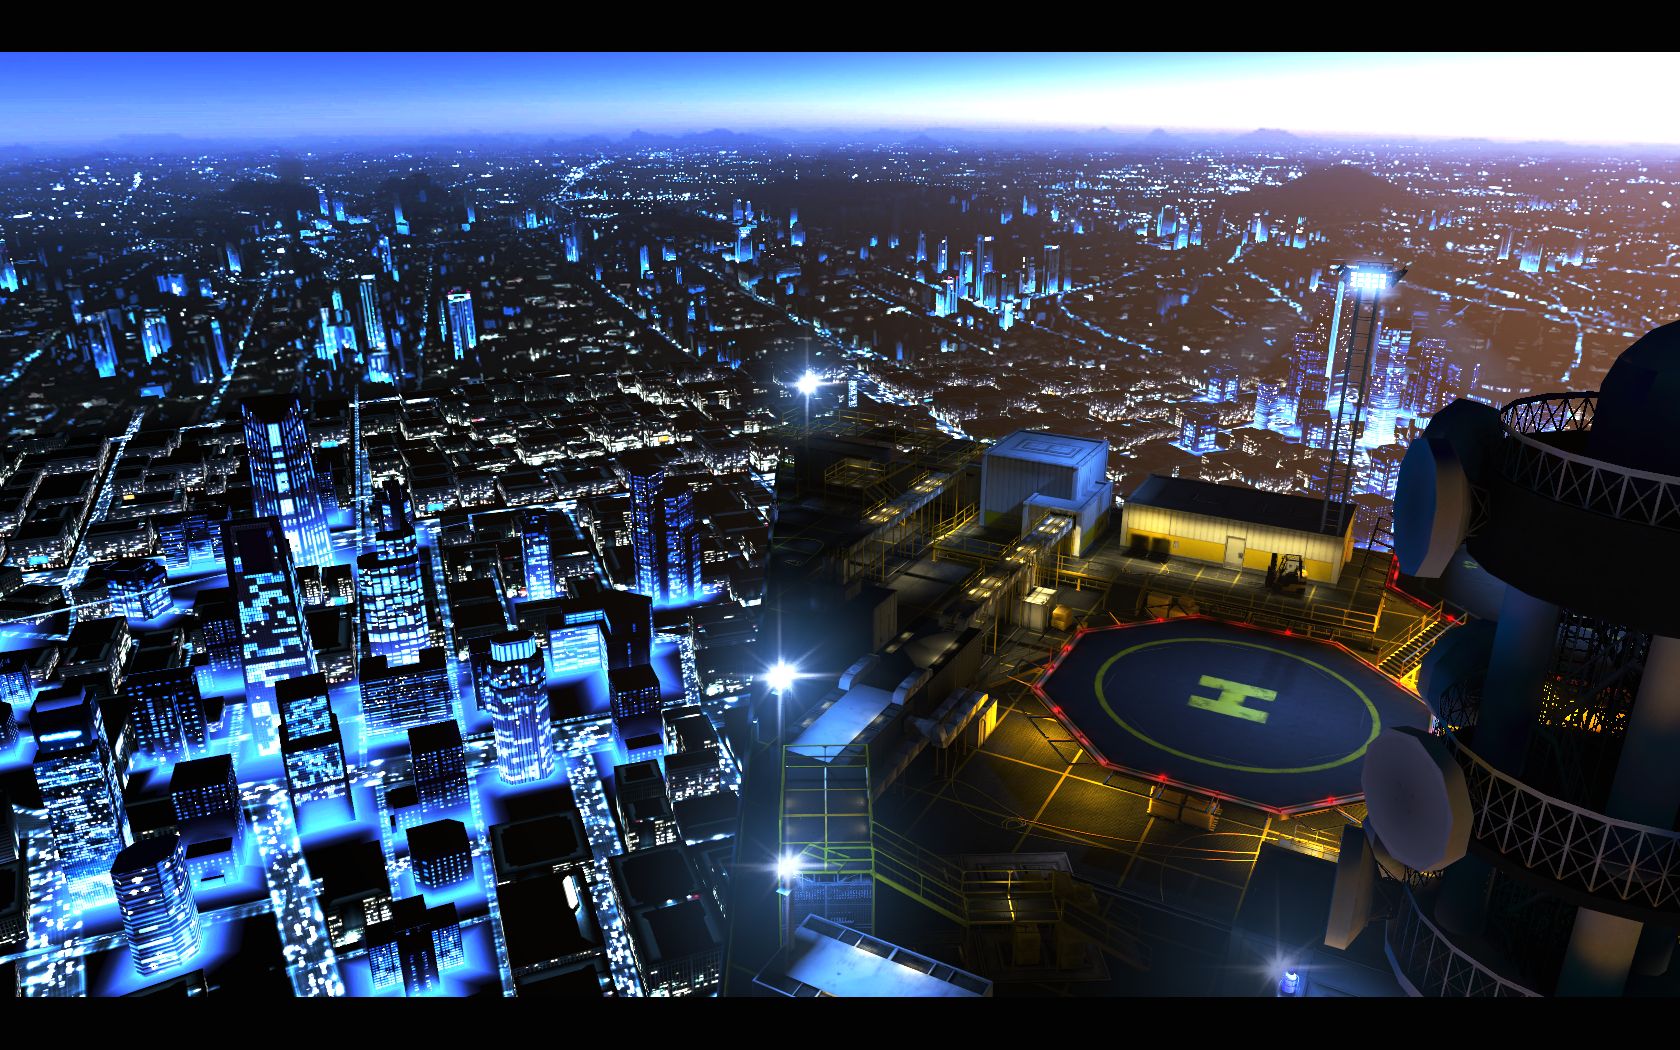 Mirror's Edge games cities and buildings - SkyscraperPage Forum